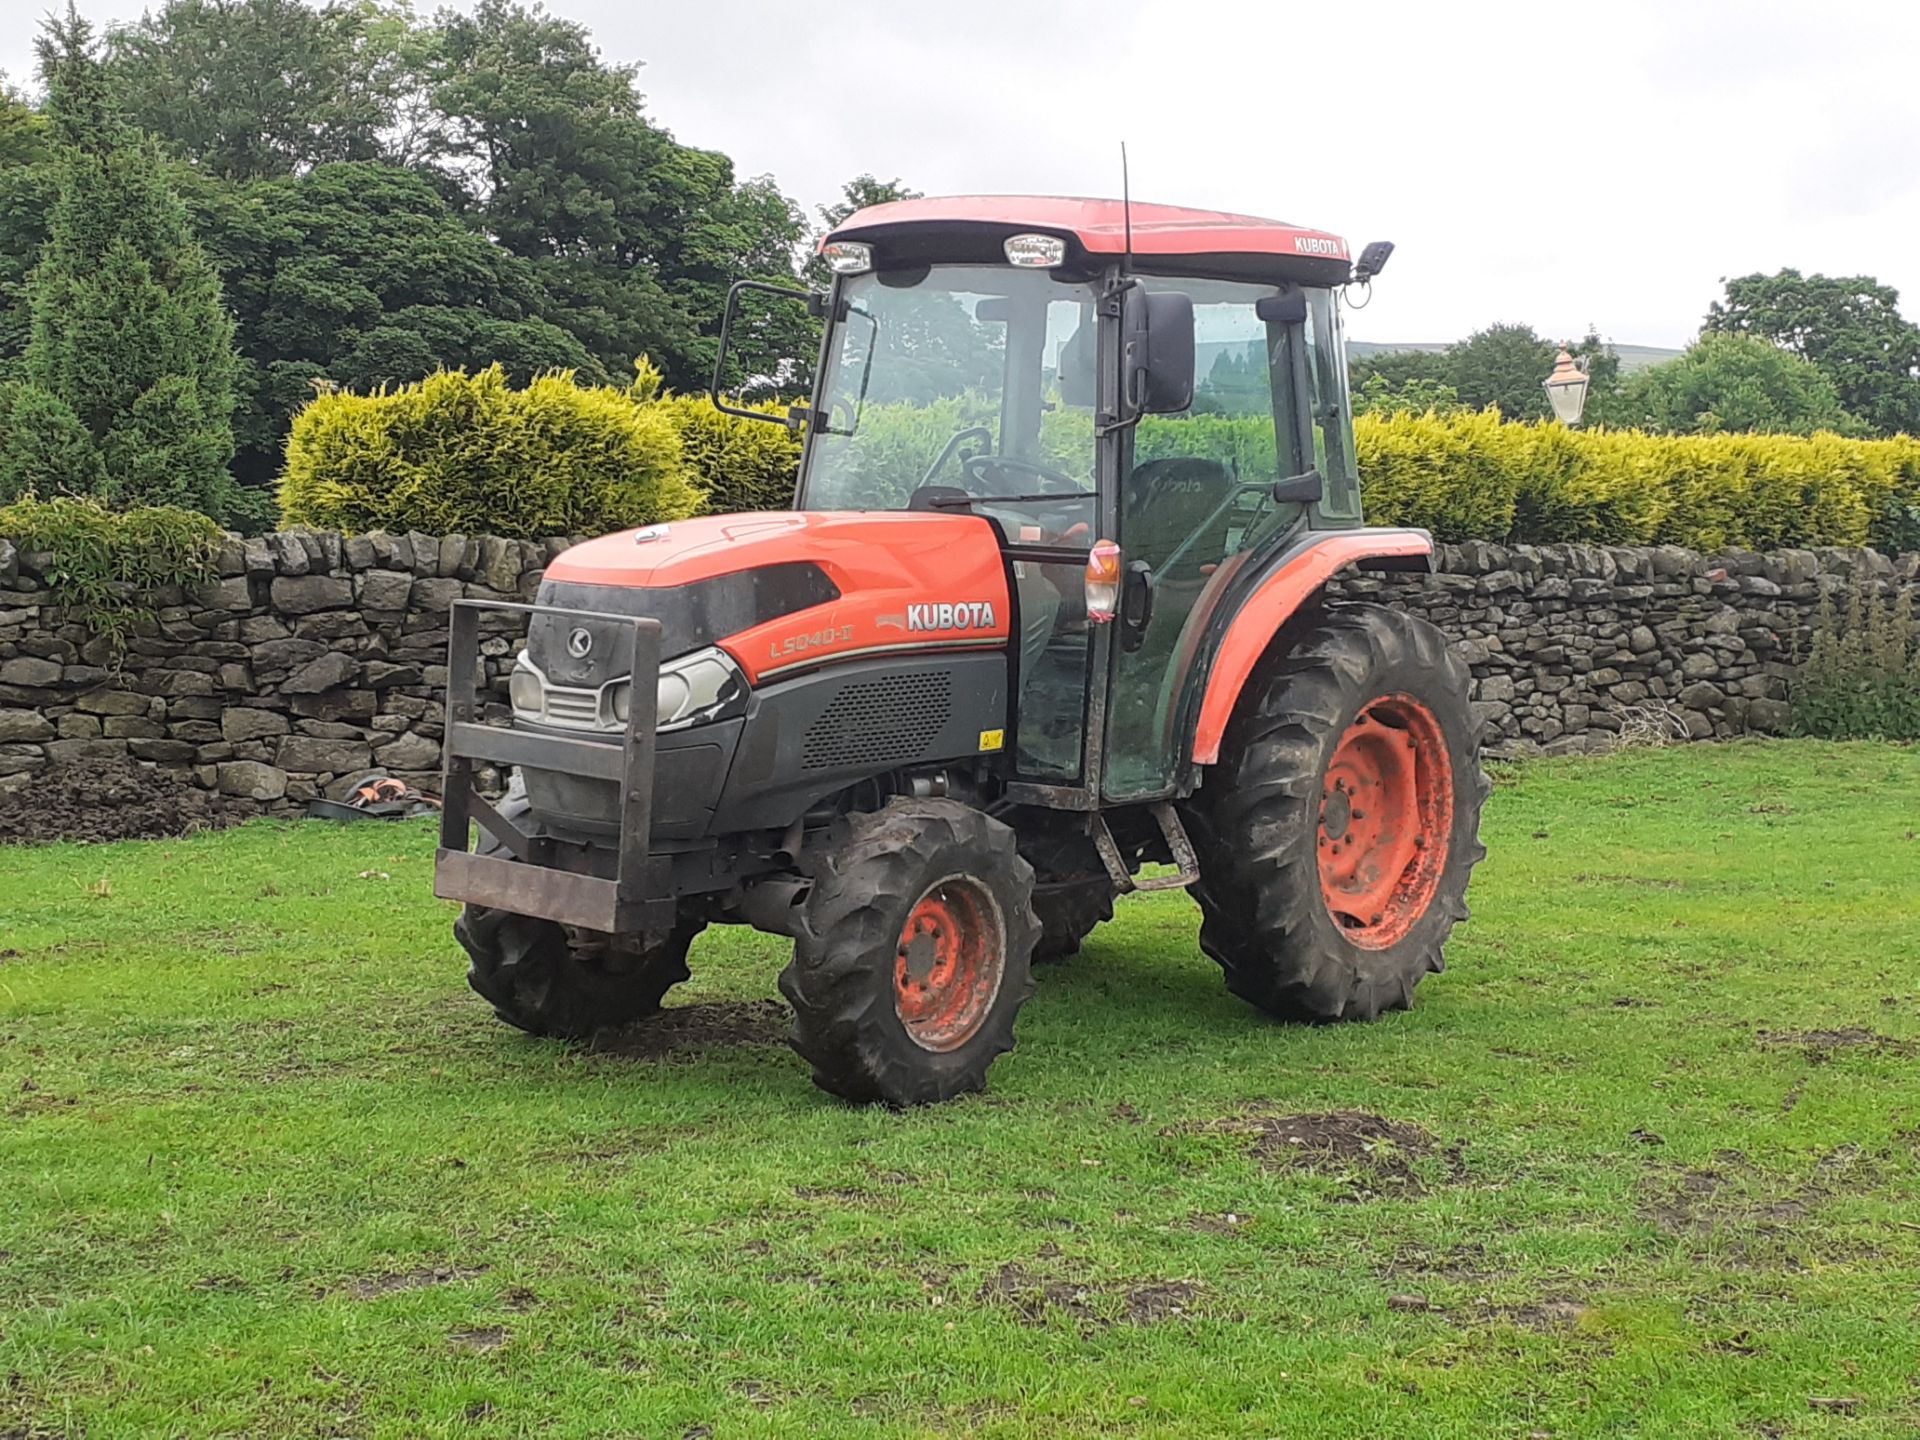 2017 KUBOTA L5040 SERIEE II COMPACT TRACTOR, ROAD REGISTERED, A LOW 3490 HOURS *PLUS VAT* - Image 2 of 4